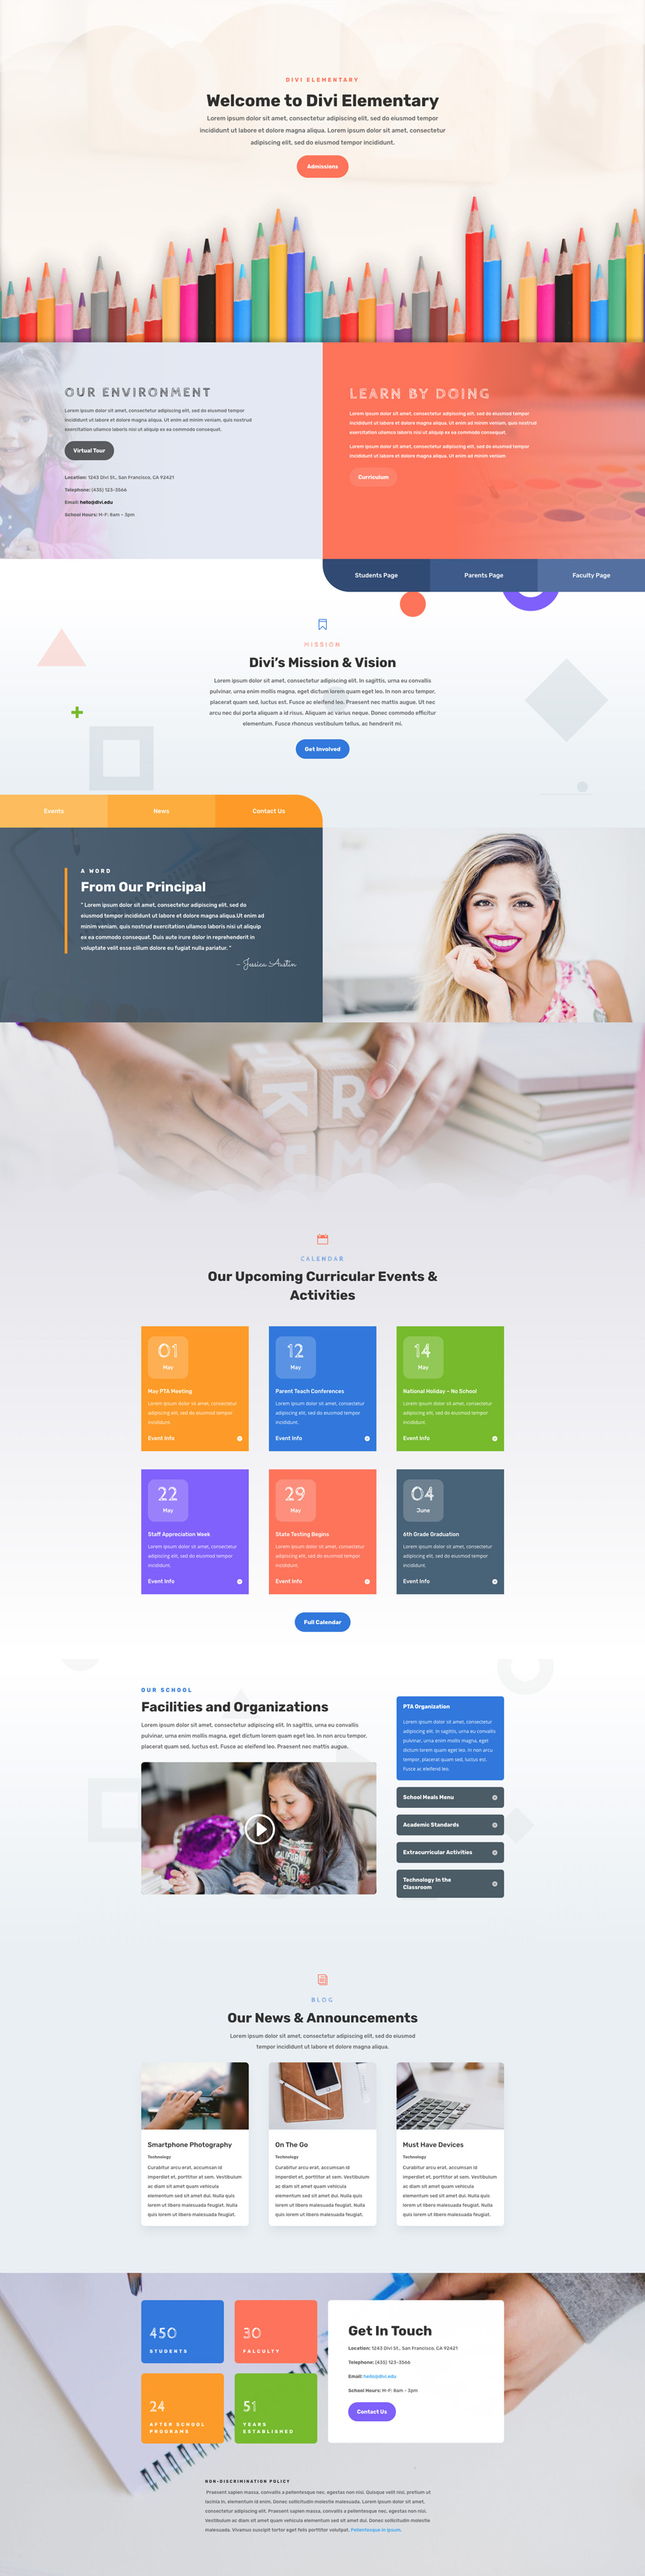 visual-web-page-builder-wedding-planner-template